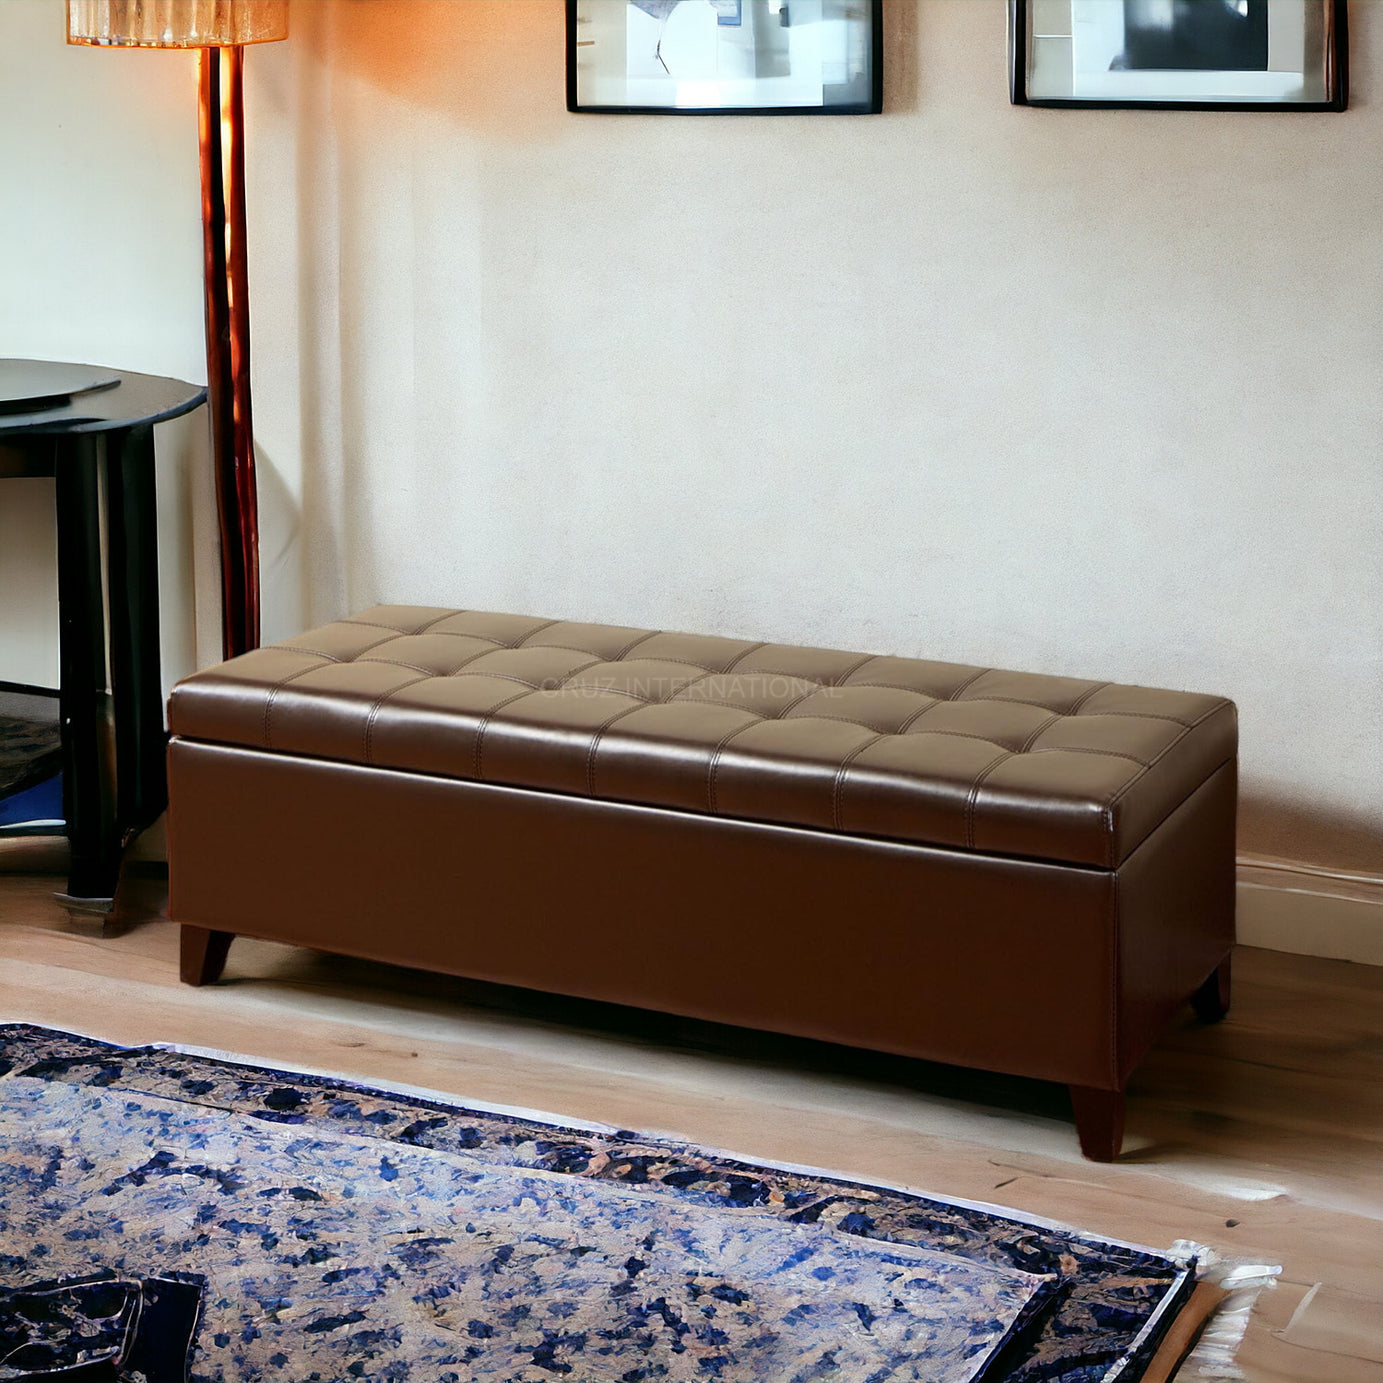 Ottoman Bench with Foldable Storage Cubes - Flexible and Functional Design